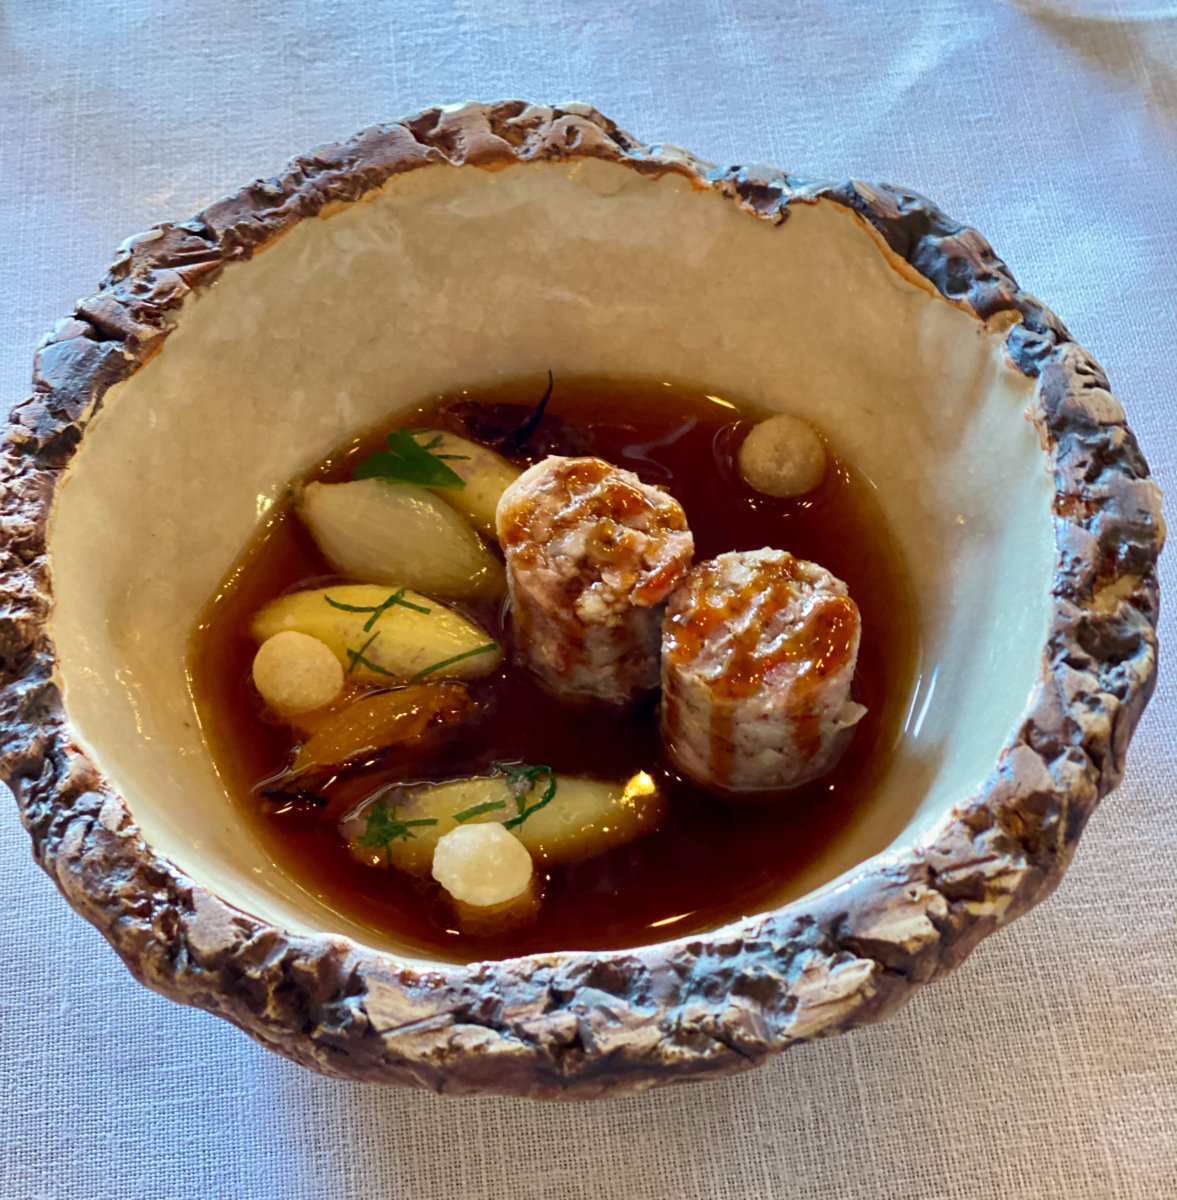 Pork sausage cooked in consommé with boiled potatoes at La Bouitte ( 3*), St Martin de Belleville